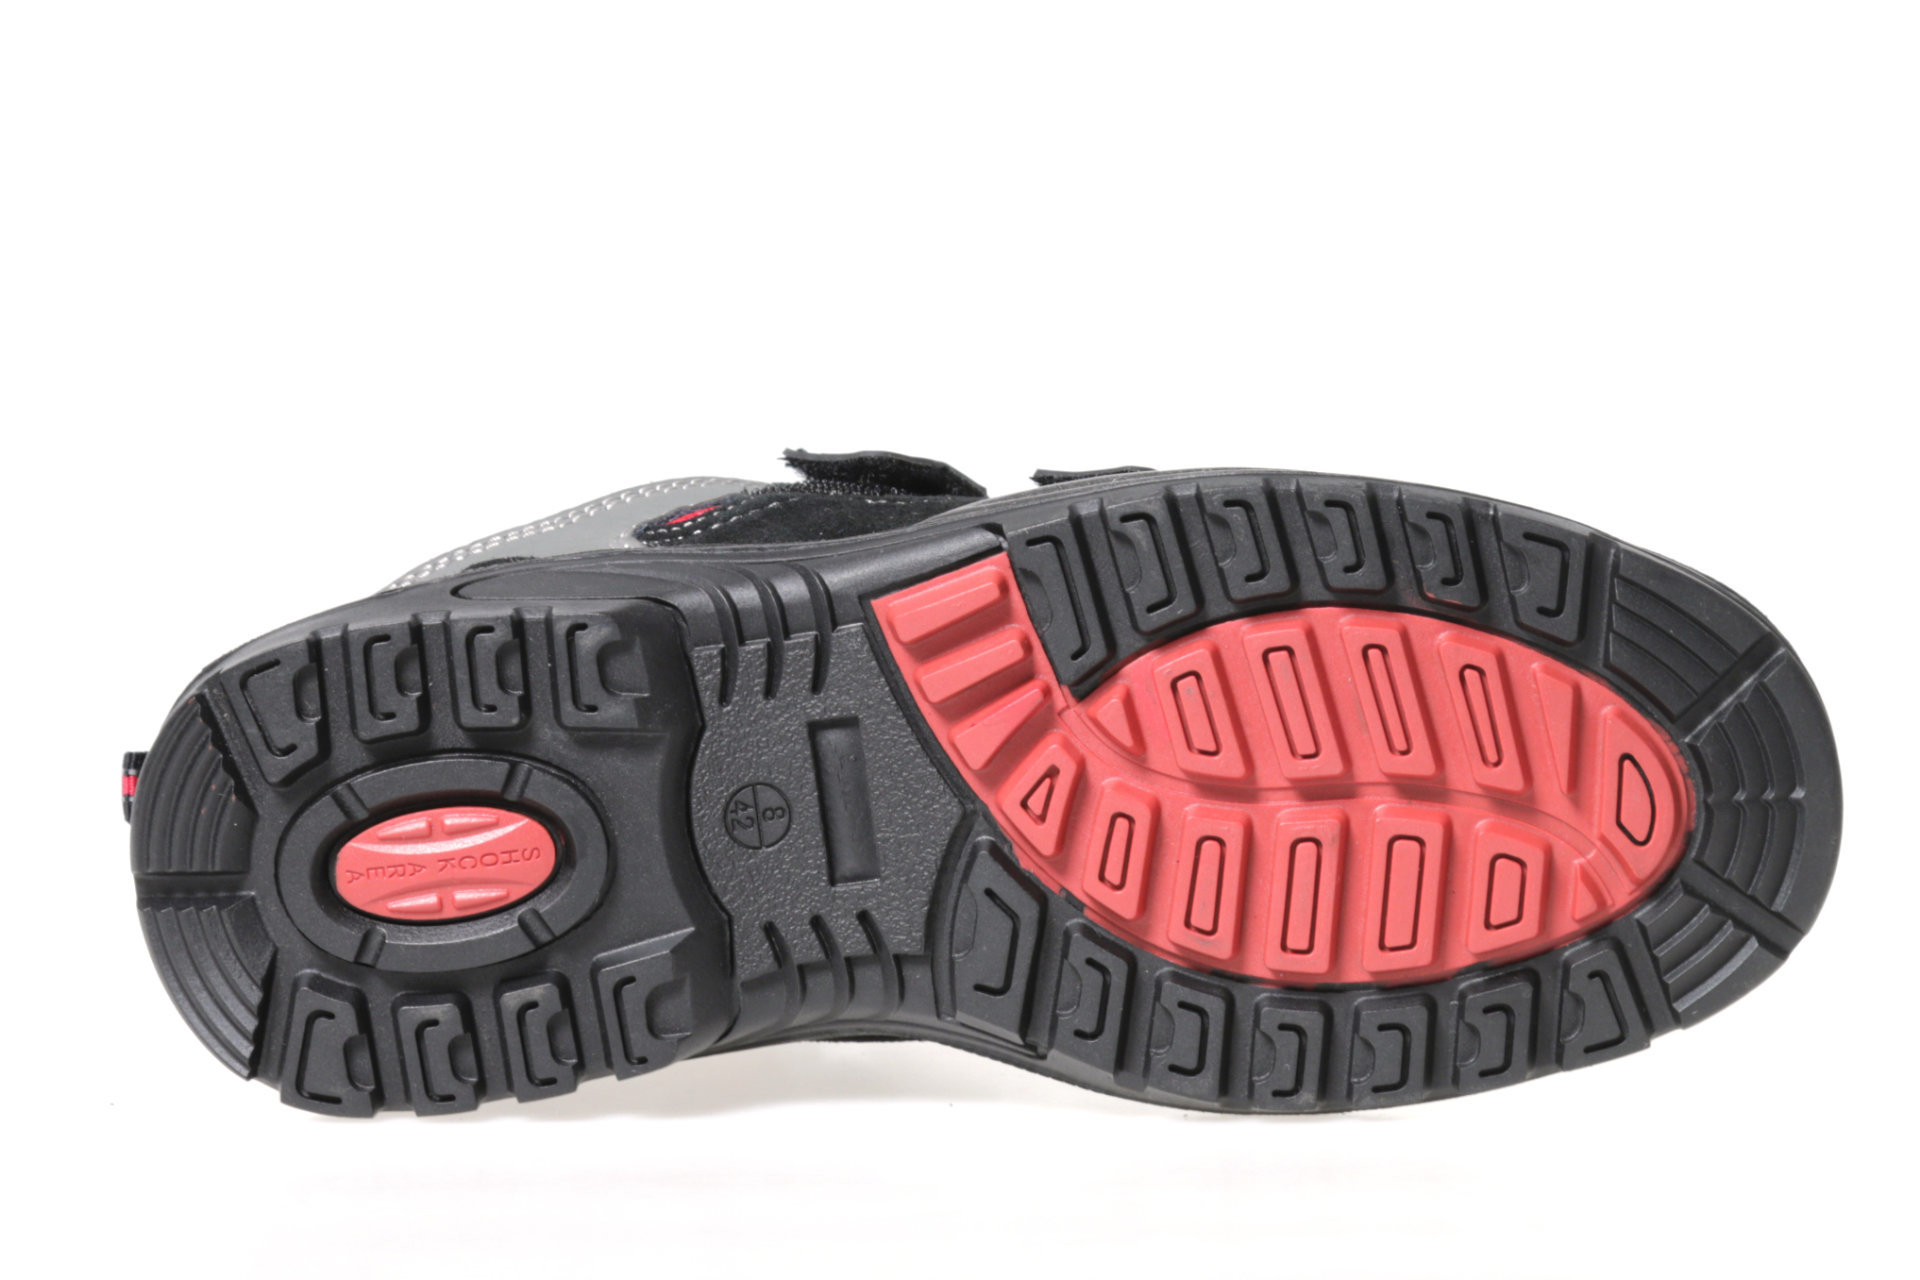 Hot selling steel safety shoes